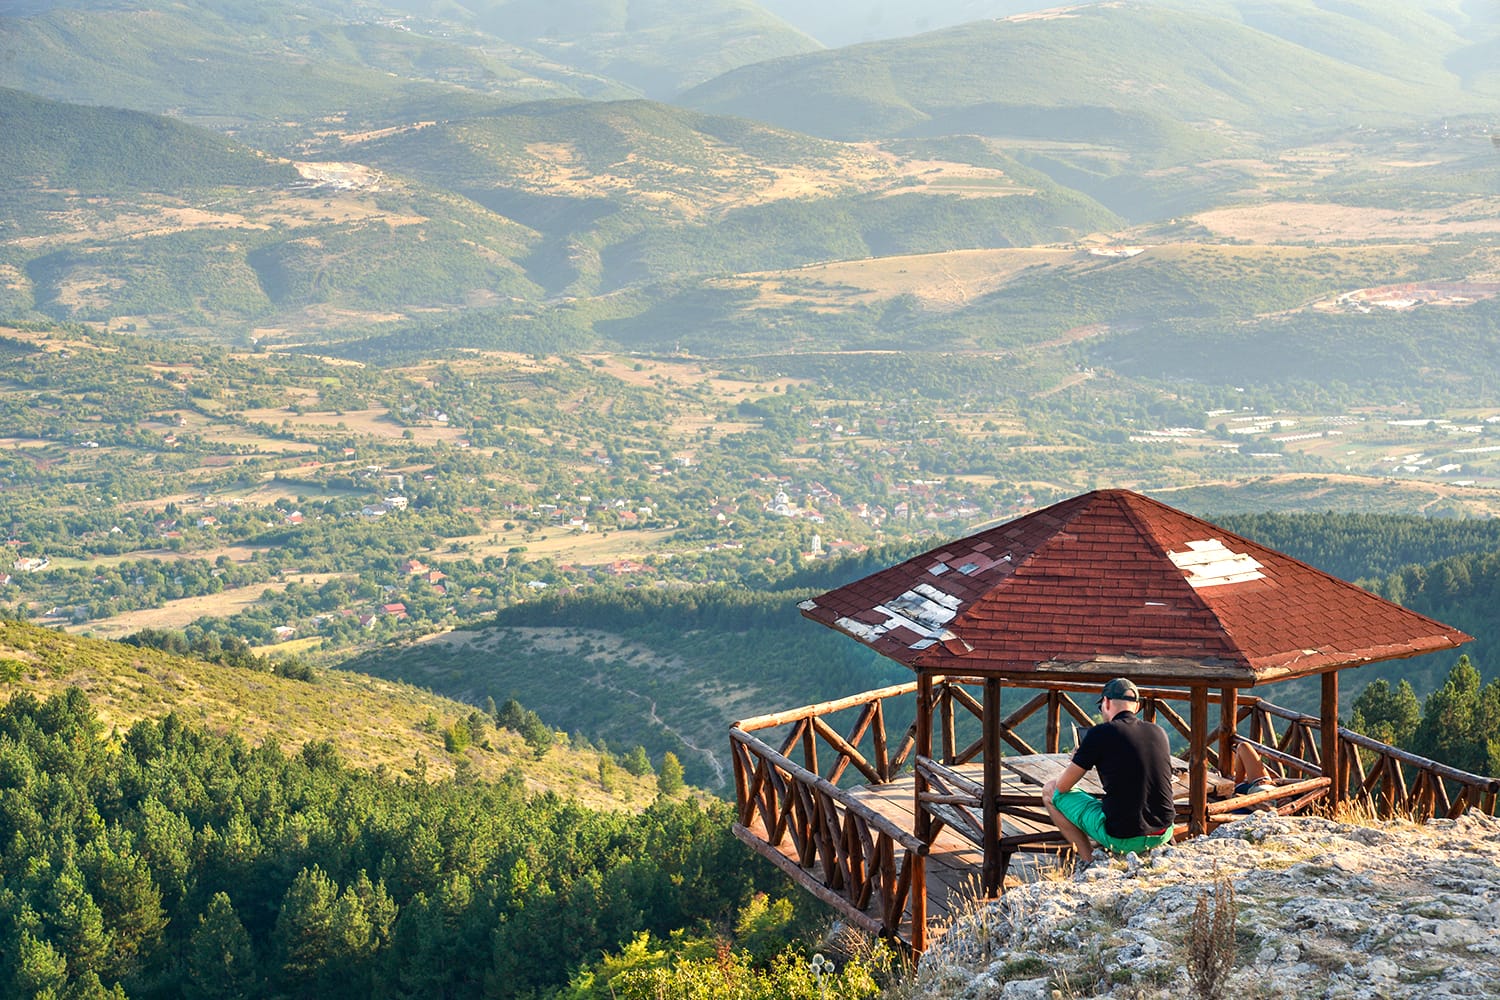 Millennium Cross site. Viewing platform overlooks scenery to the south of the crucifix, Vodno Mountain in Skopje, Macedonia